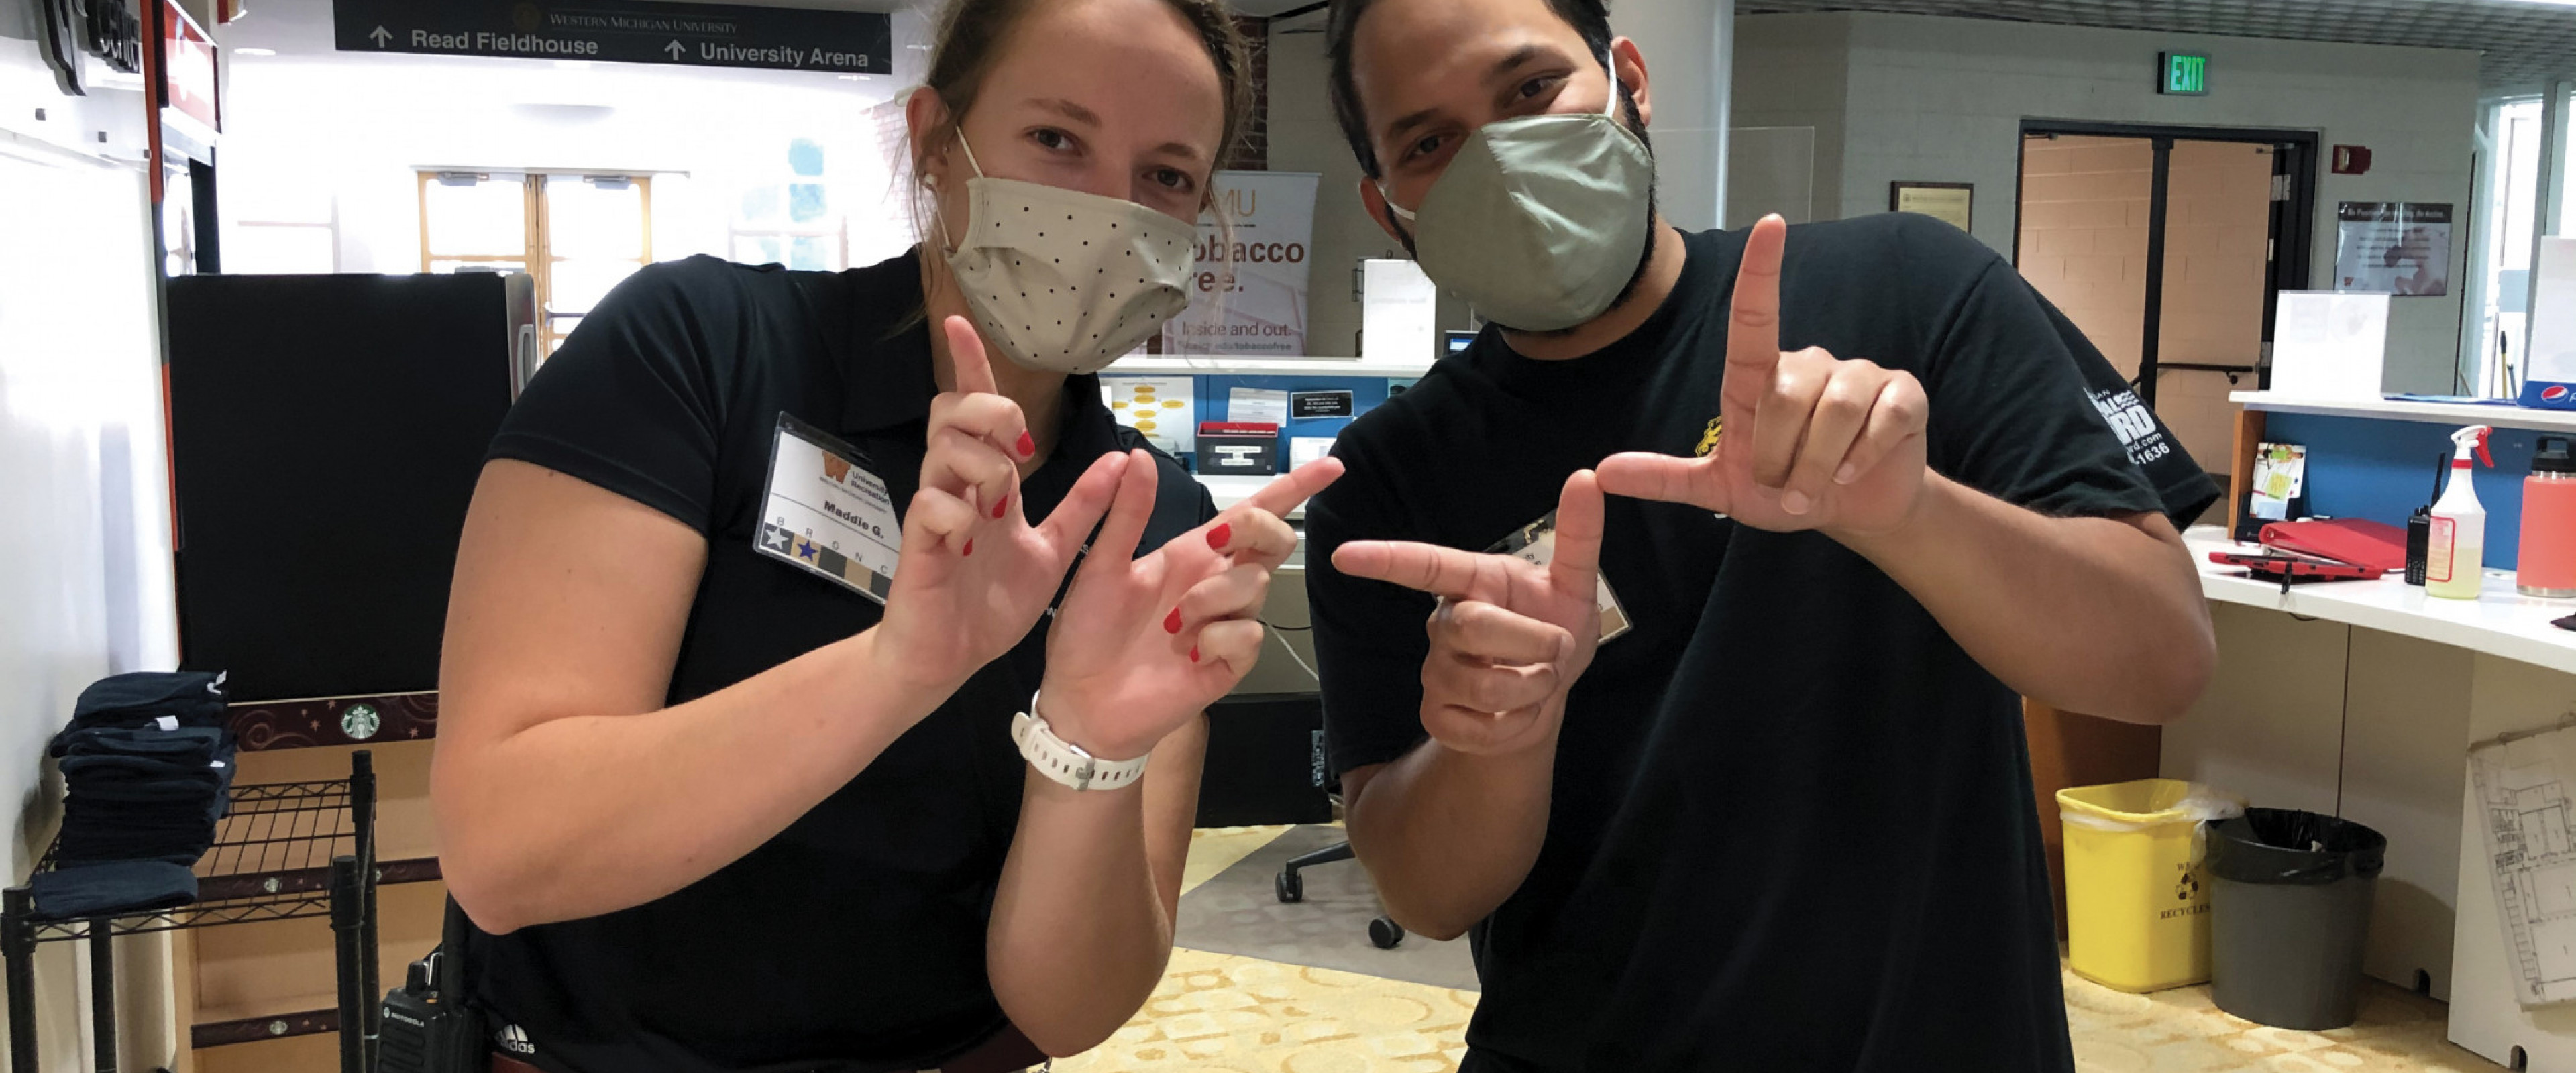 Two SRC student employees working behind the service desk with masks making the sign of the W with their hands.